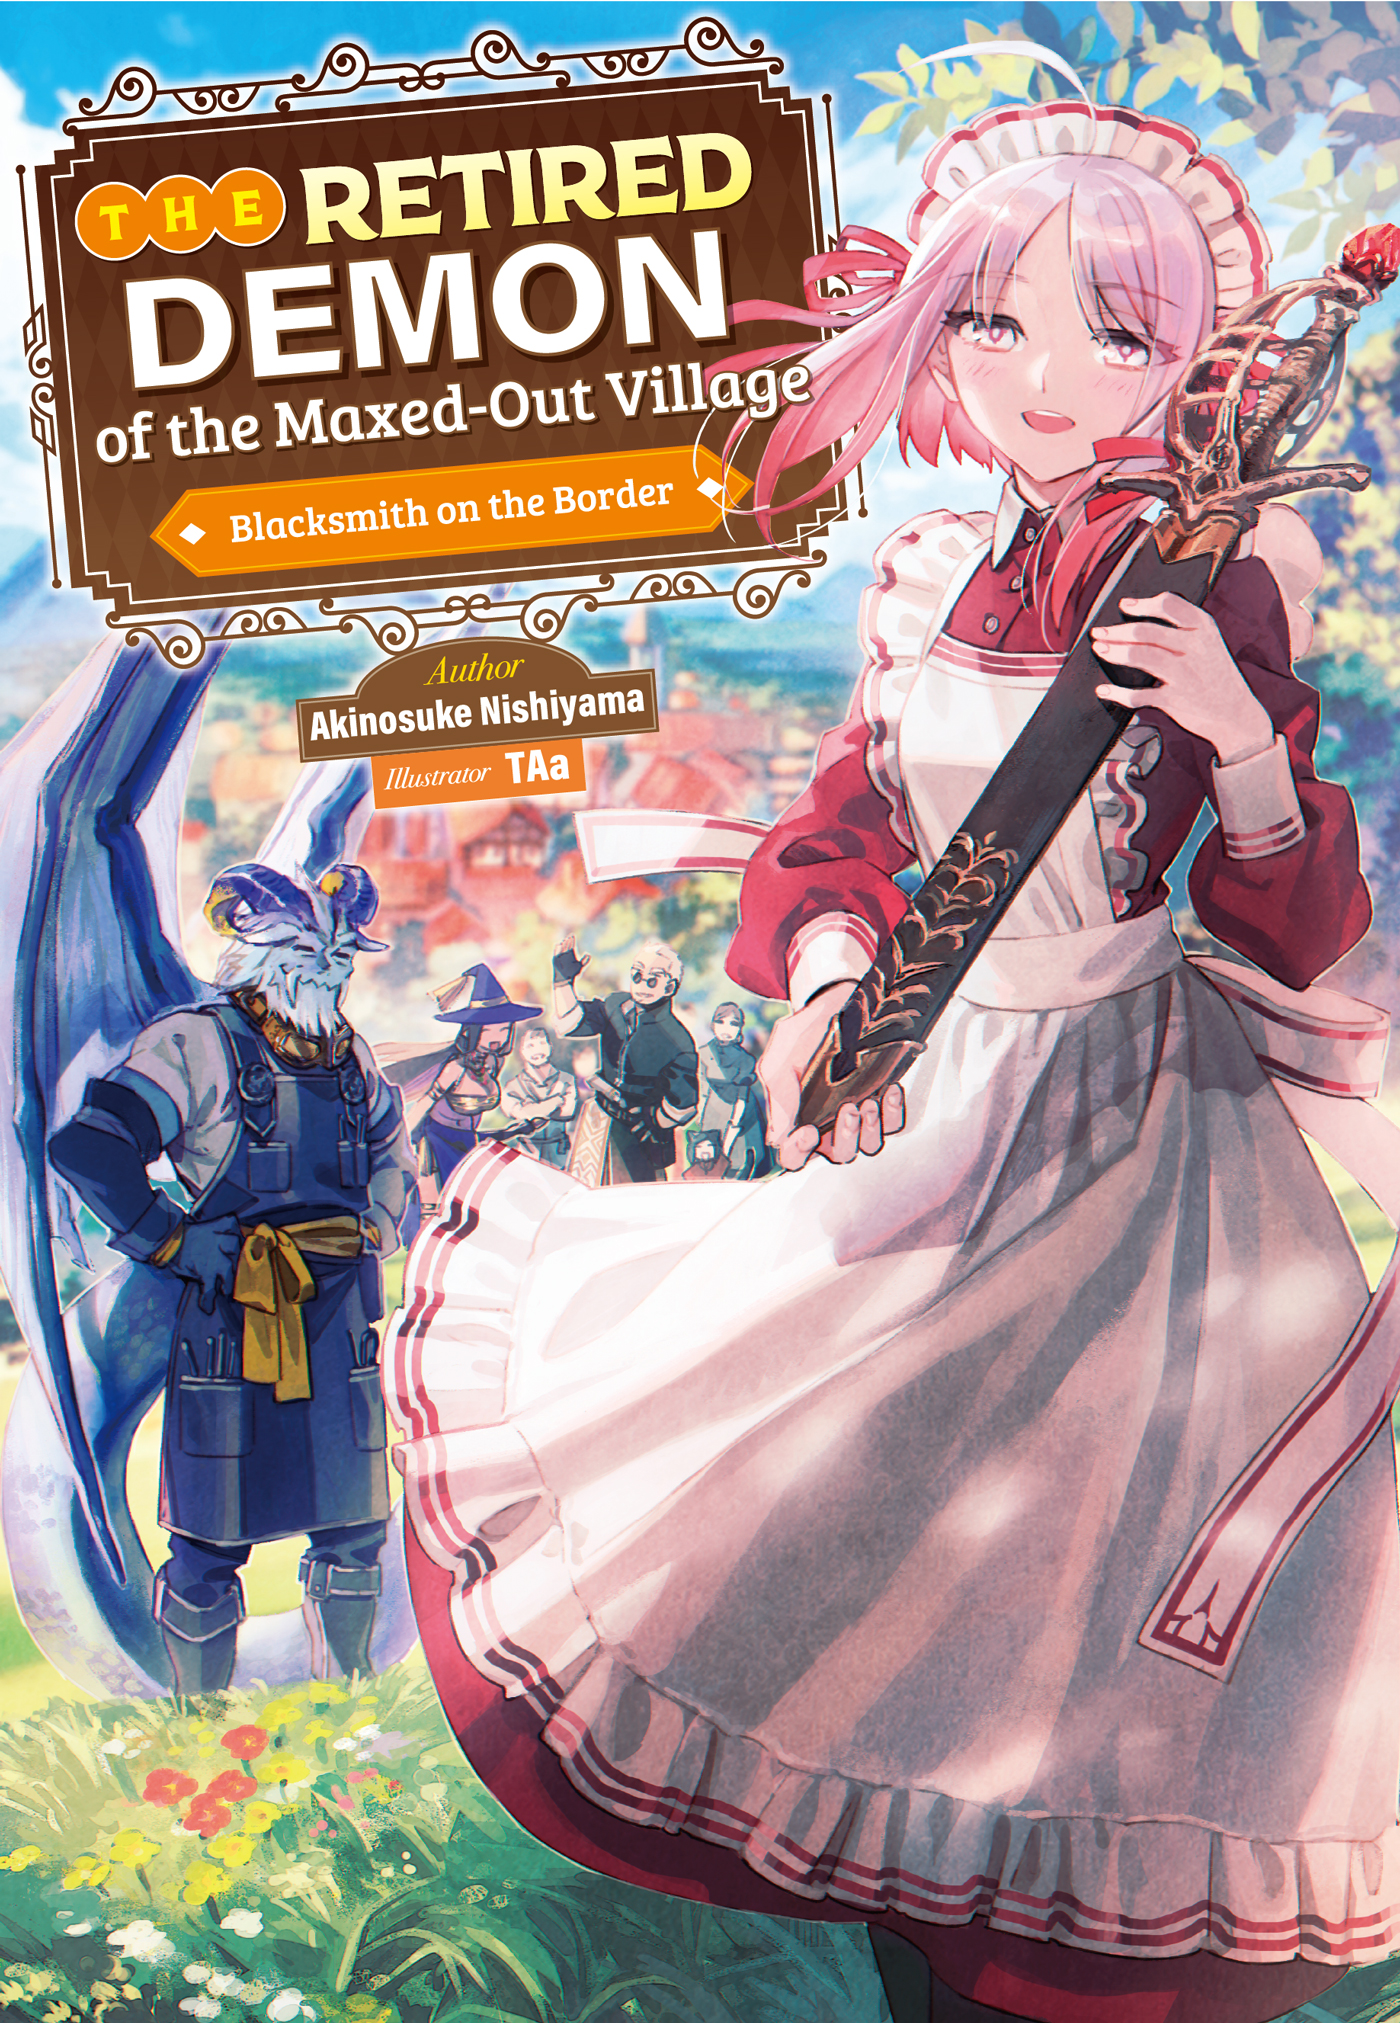 The Retired Demon of the Maxed-Out Village by Akinosuke Nishiyama (Story), TAa (Illustrations)